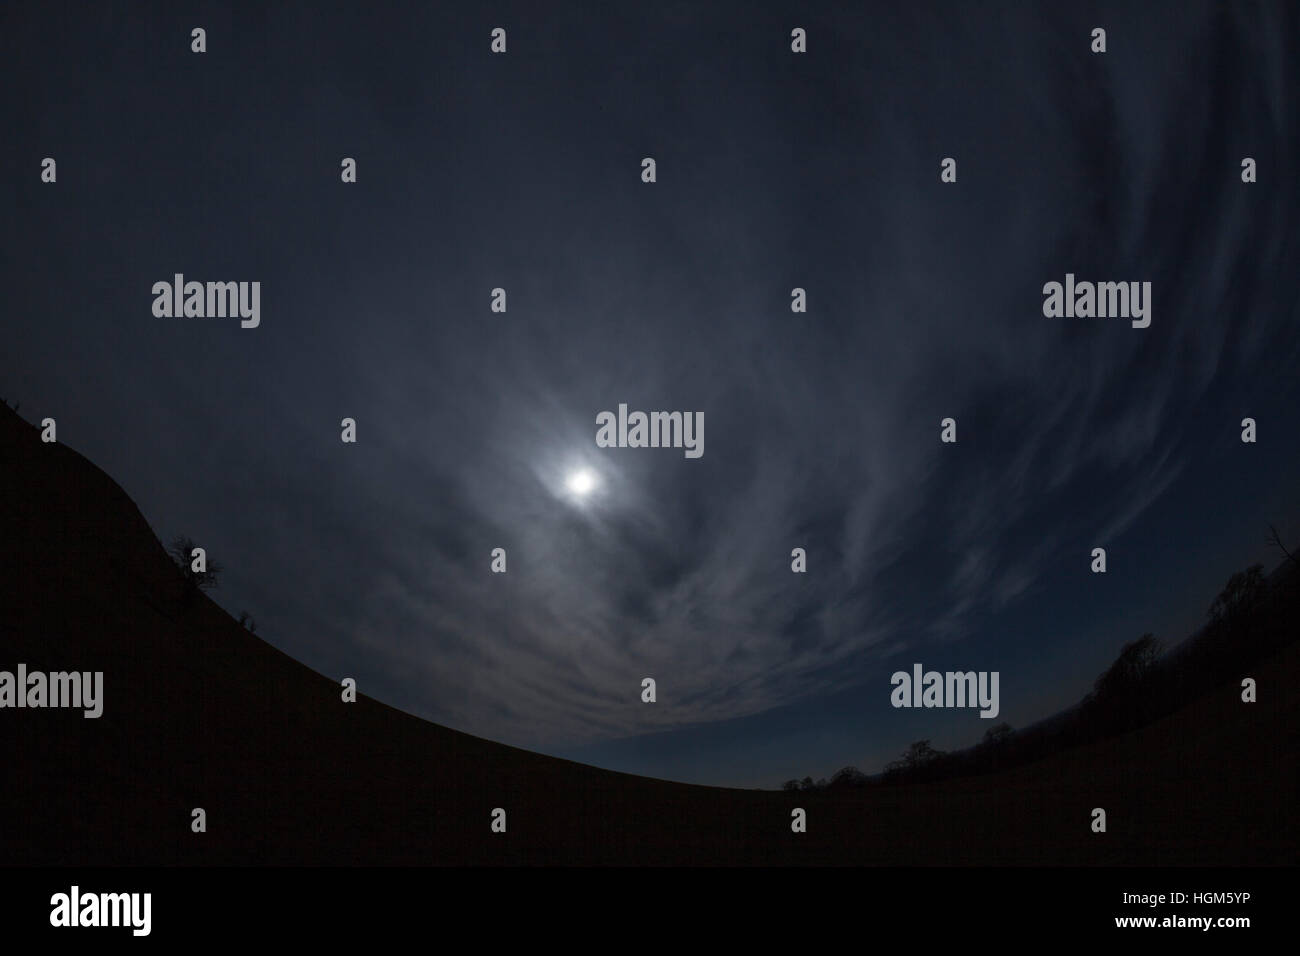 Moon in the sky with dark clouds over a hill Stock Photo